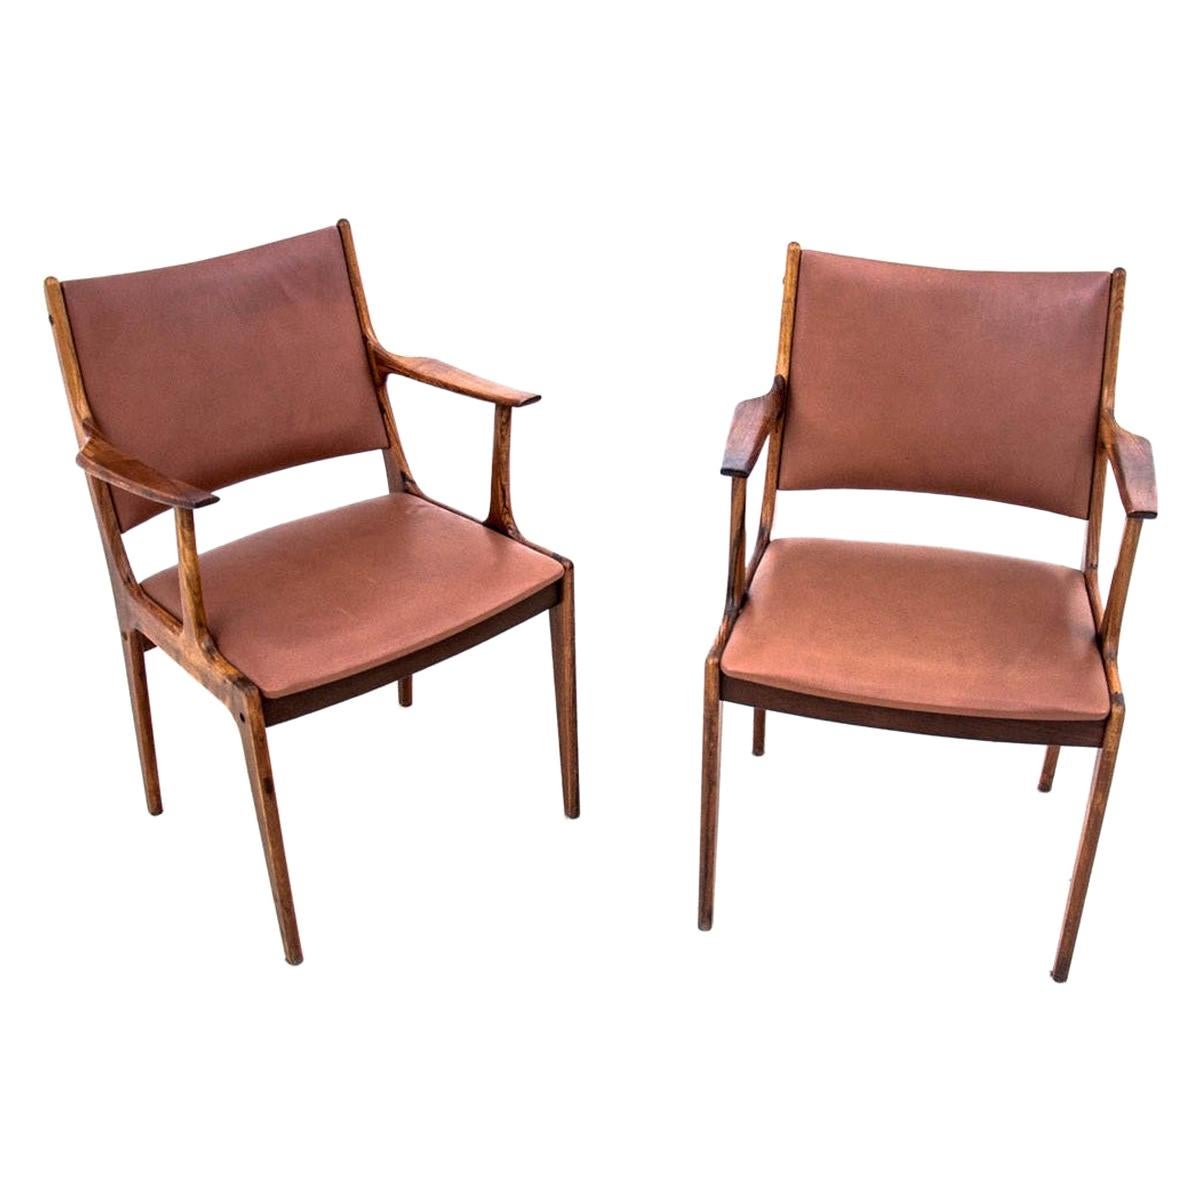 Two Rosewood Armchairs, Denmark, 1960s